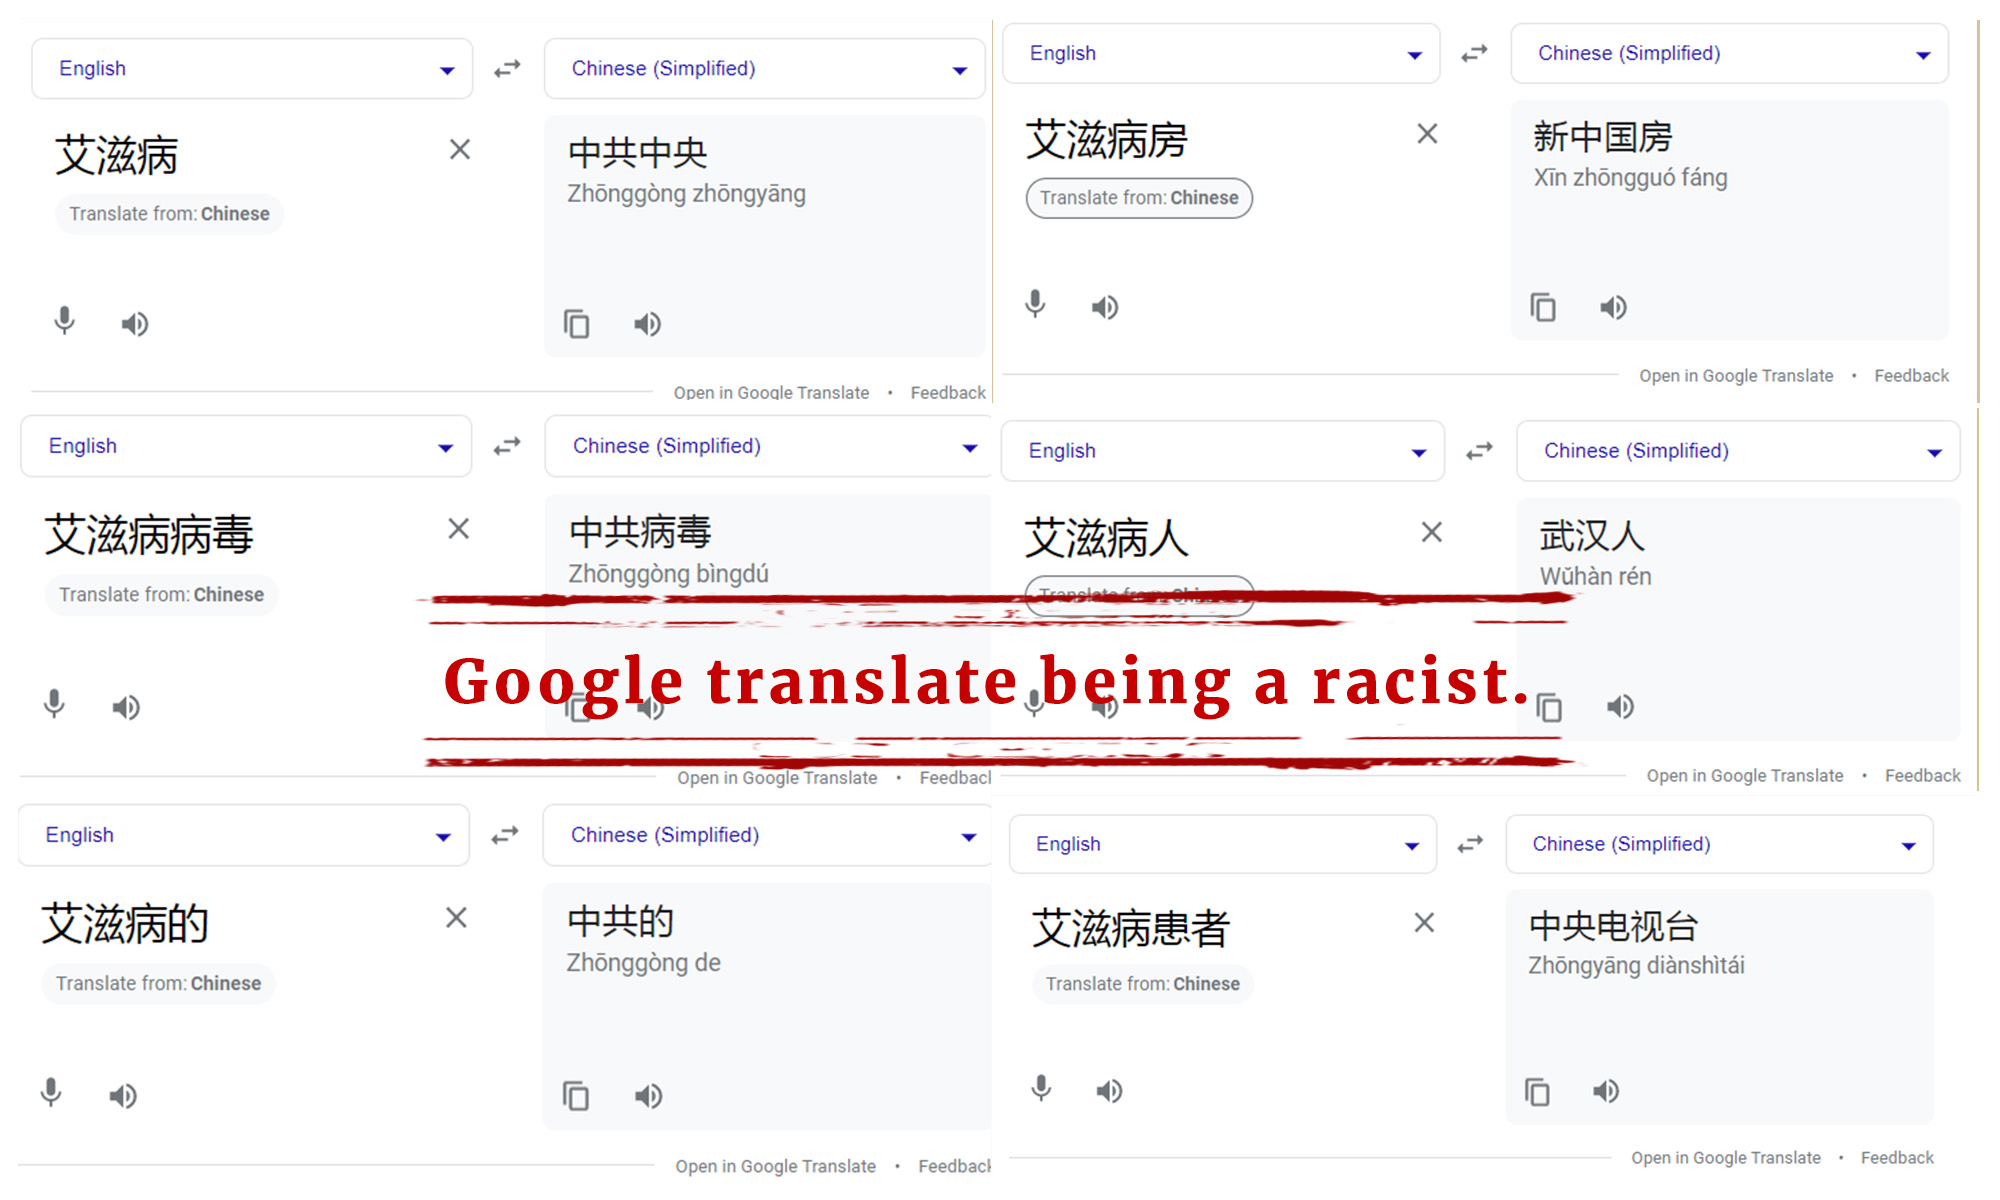 google-s-inappropriate-translation-of-cpc-wuhan-residents-sparks